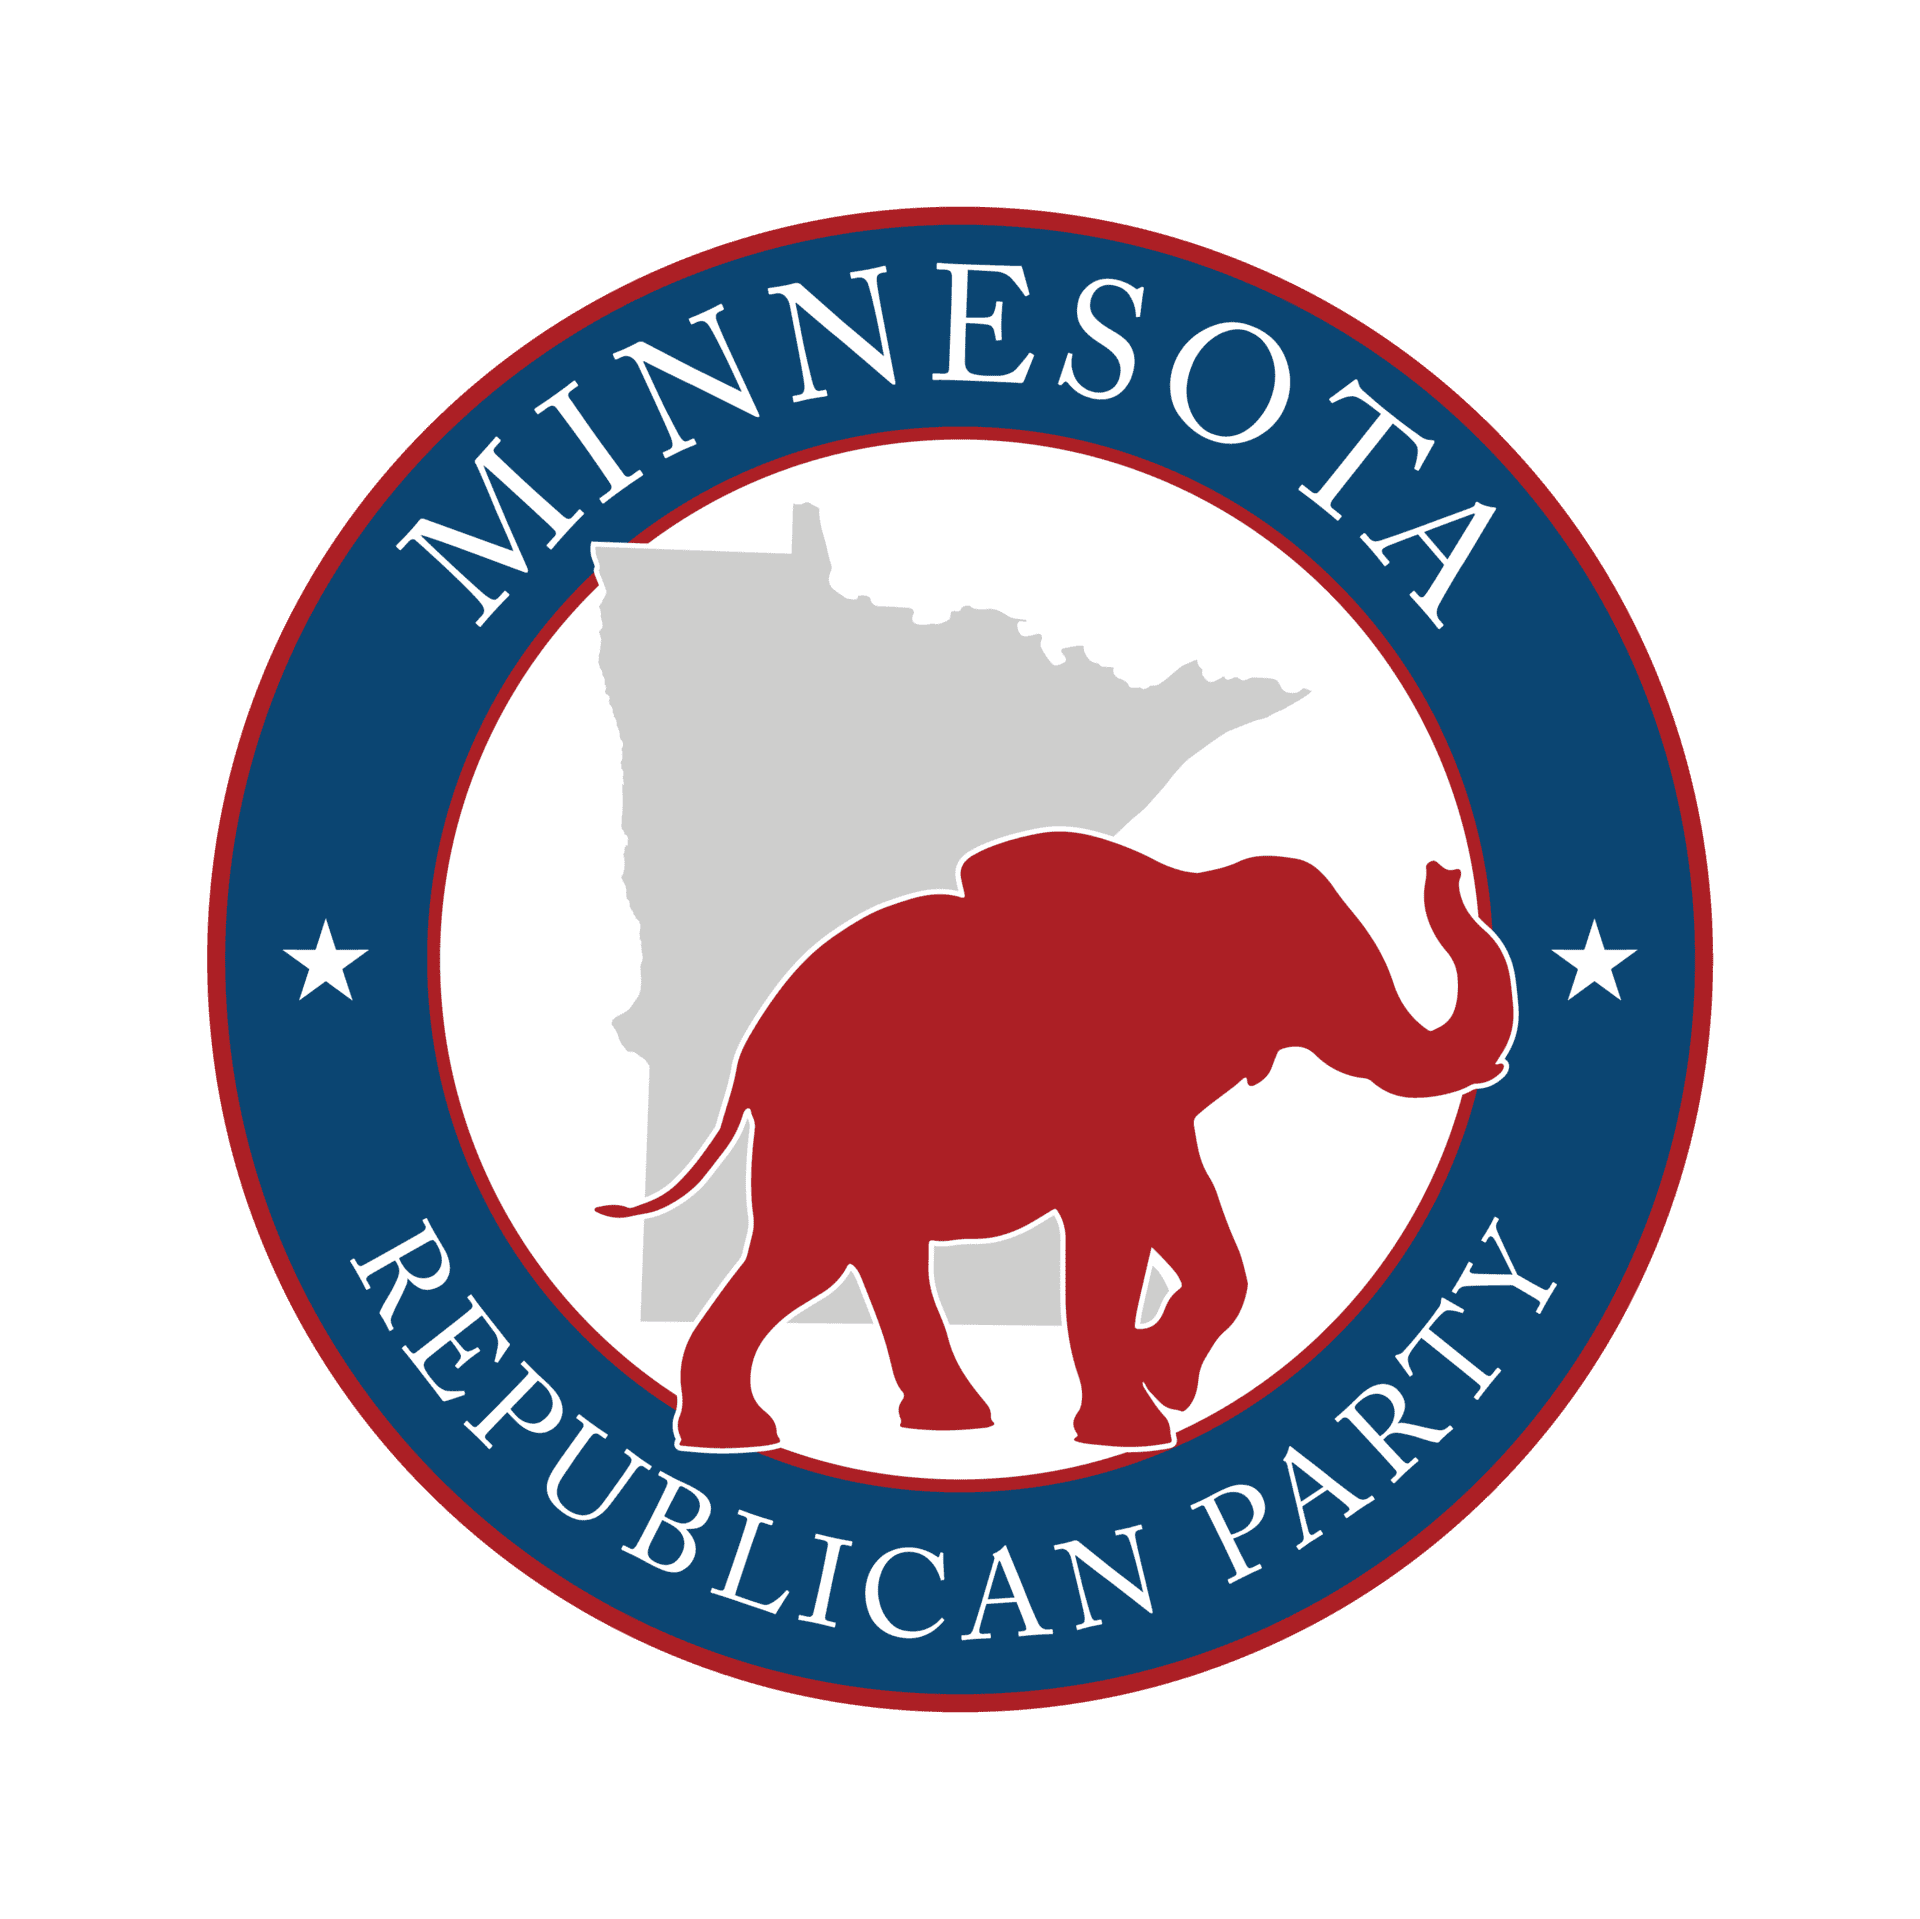 Minnesota republican party official logo cmyk full color